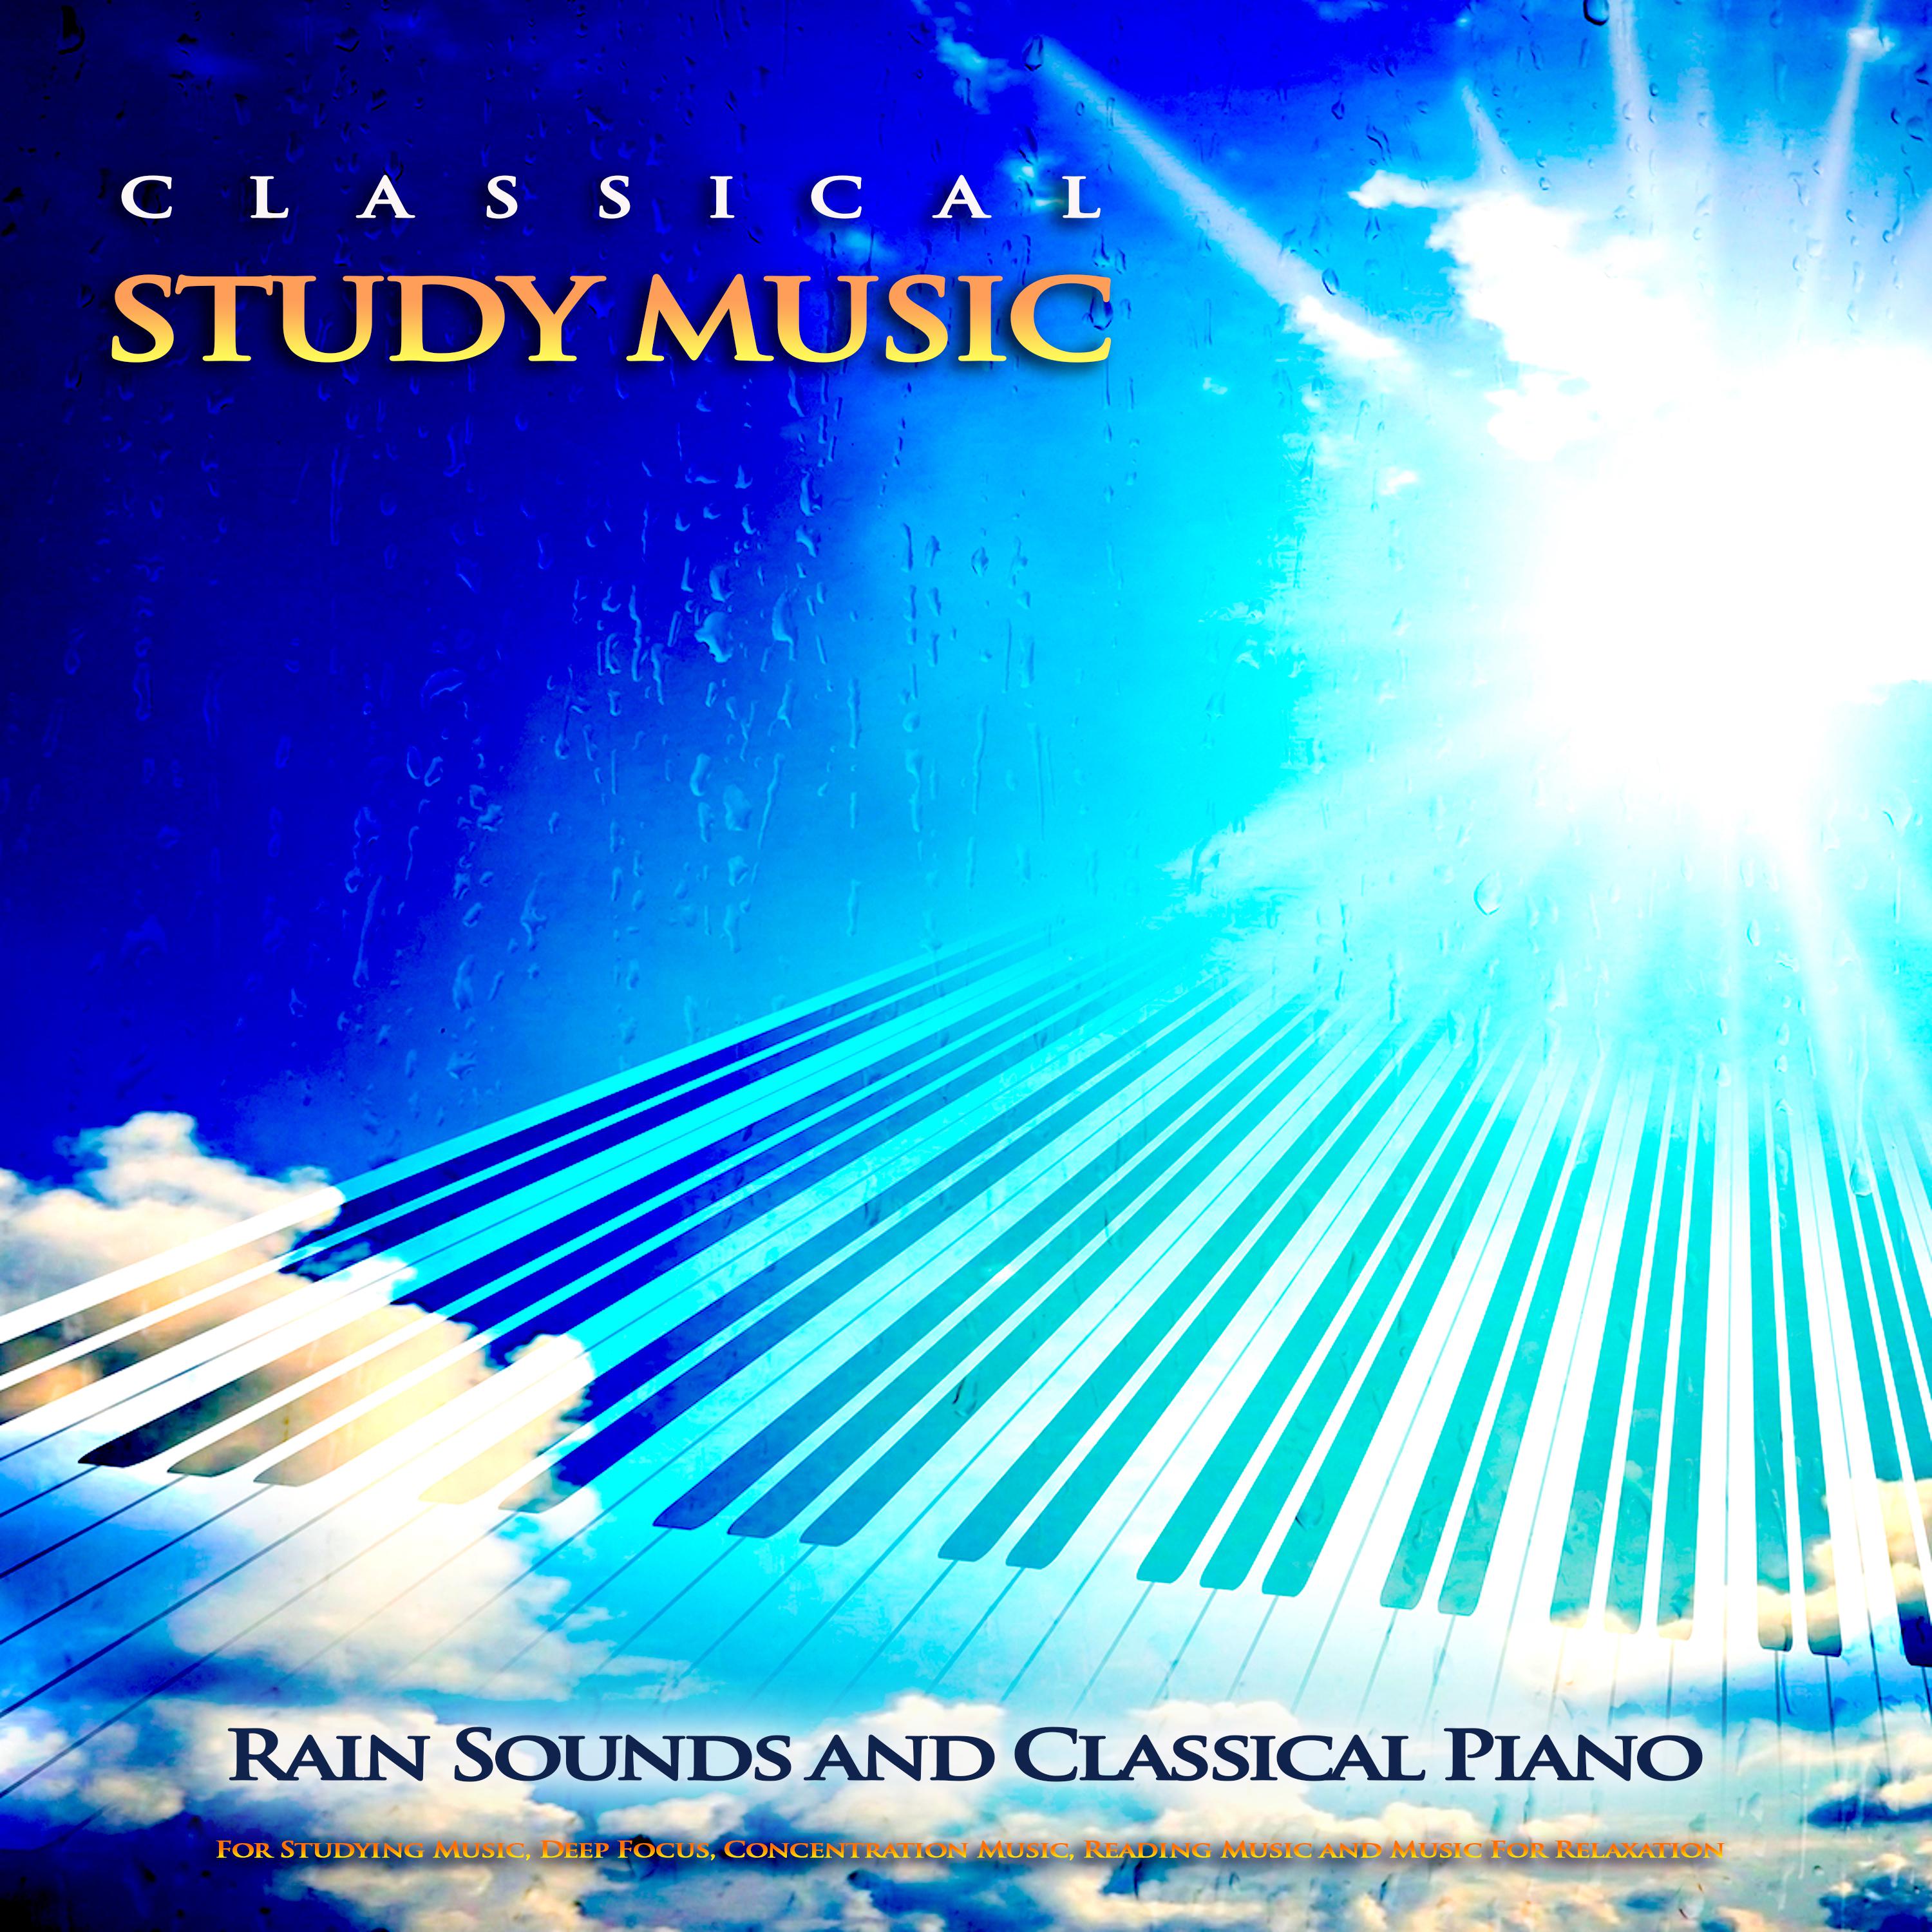 Lyric Pieces, Arietta - Grieg - Classical Piano Music and Rain Sounds - Classical Music For Studying